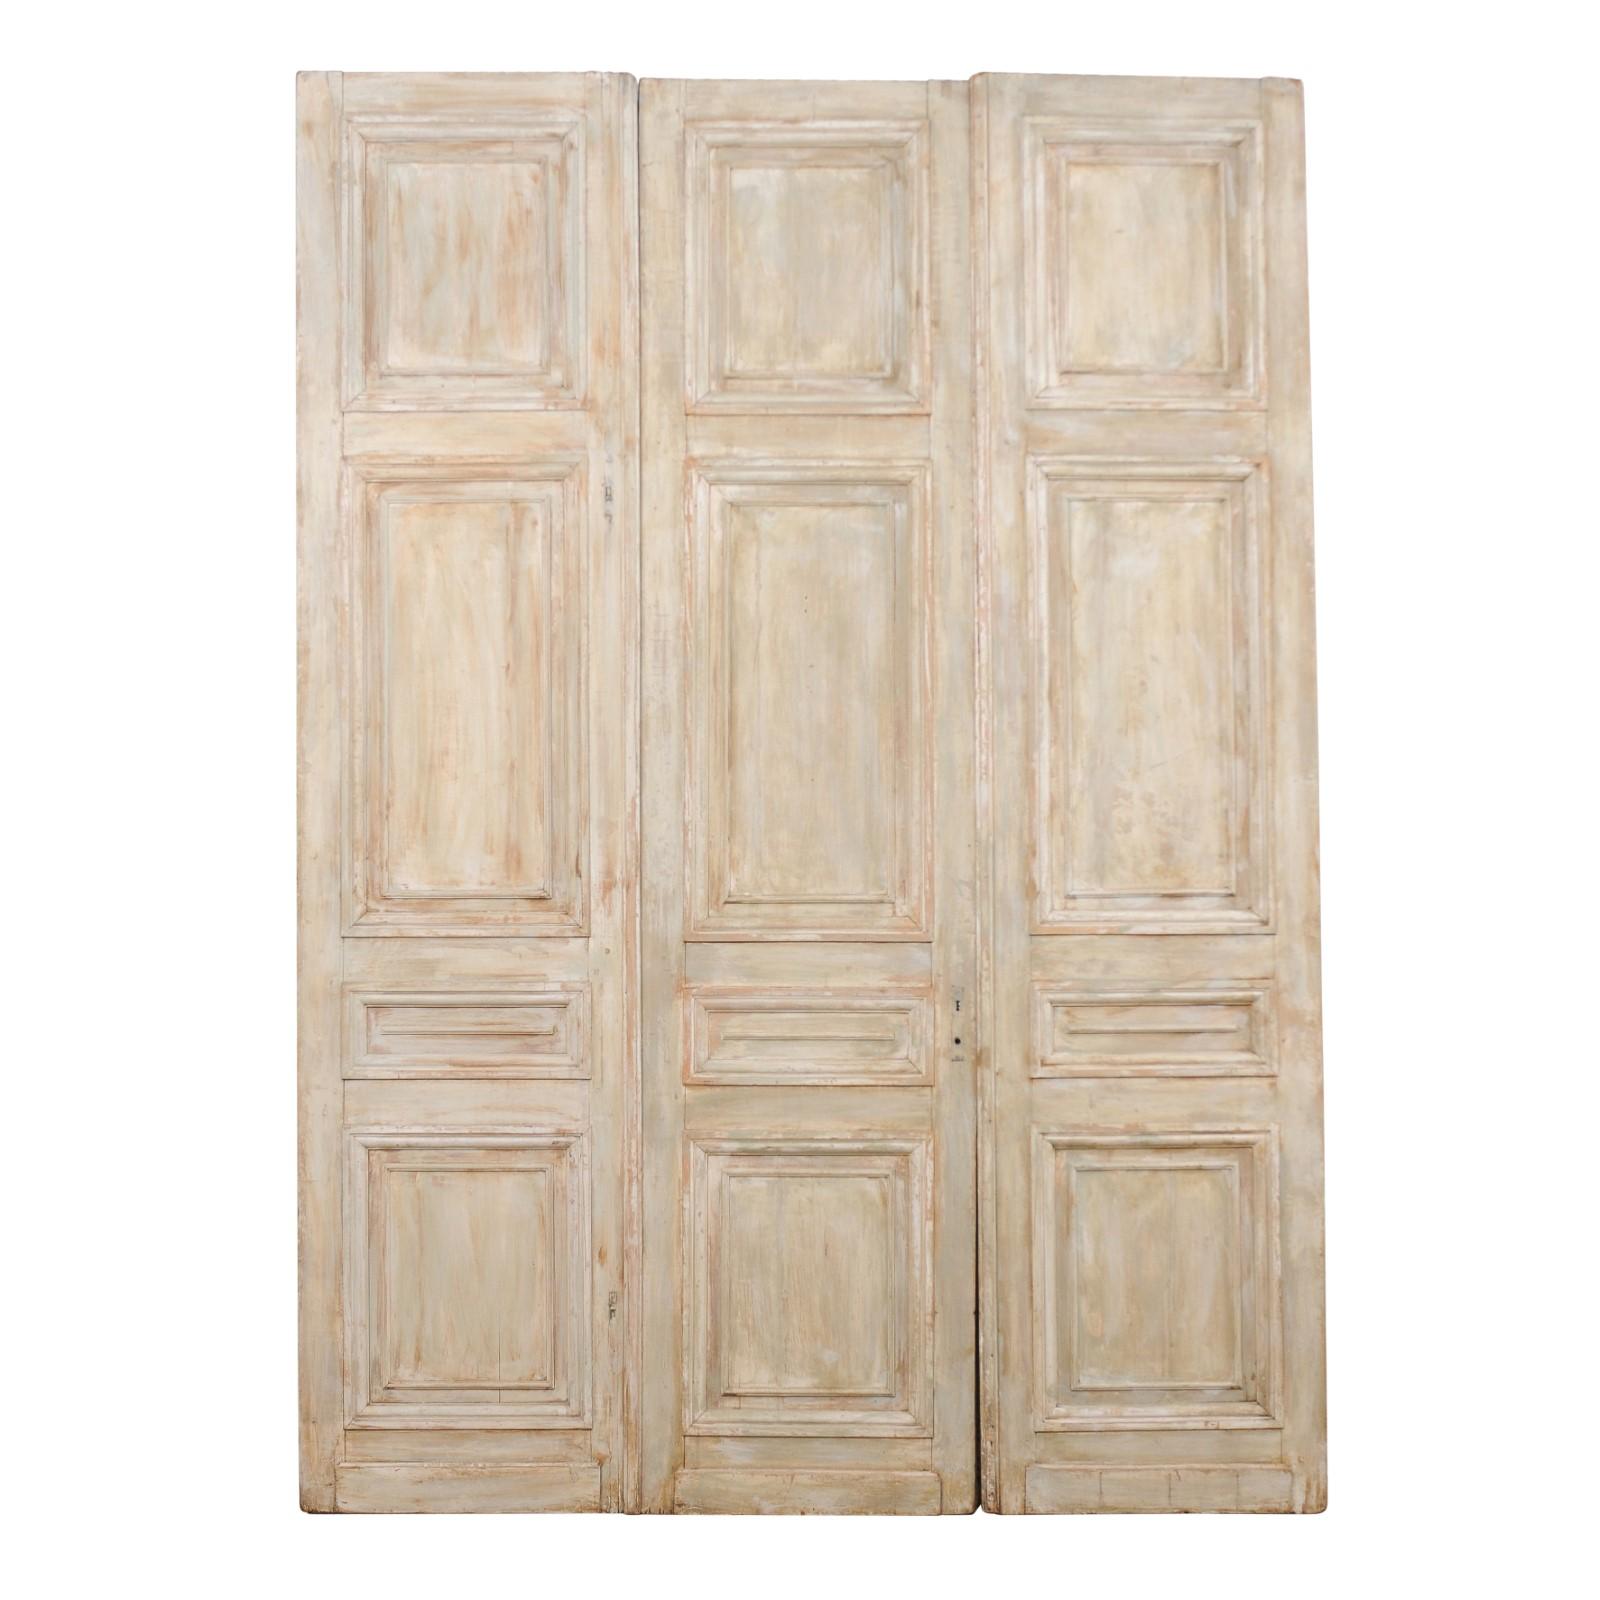 Set of Tall French 19th Century Carved Wood Doors